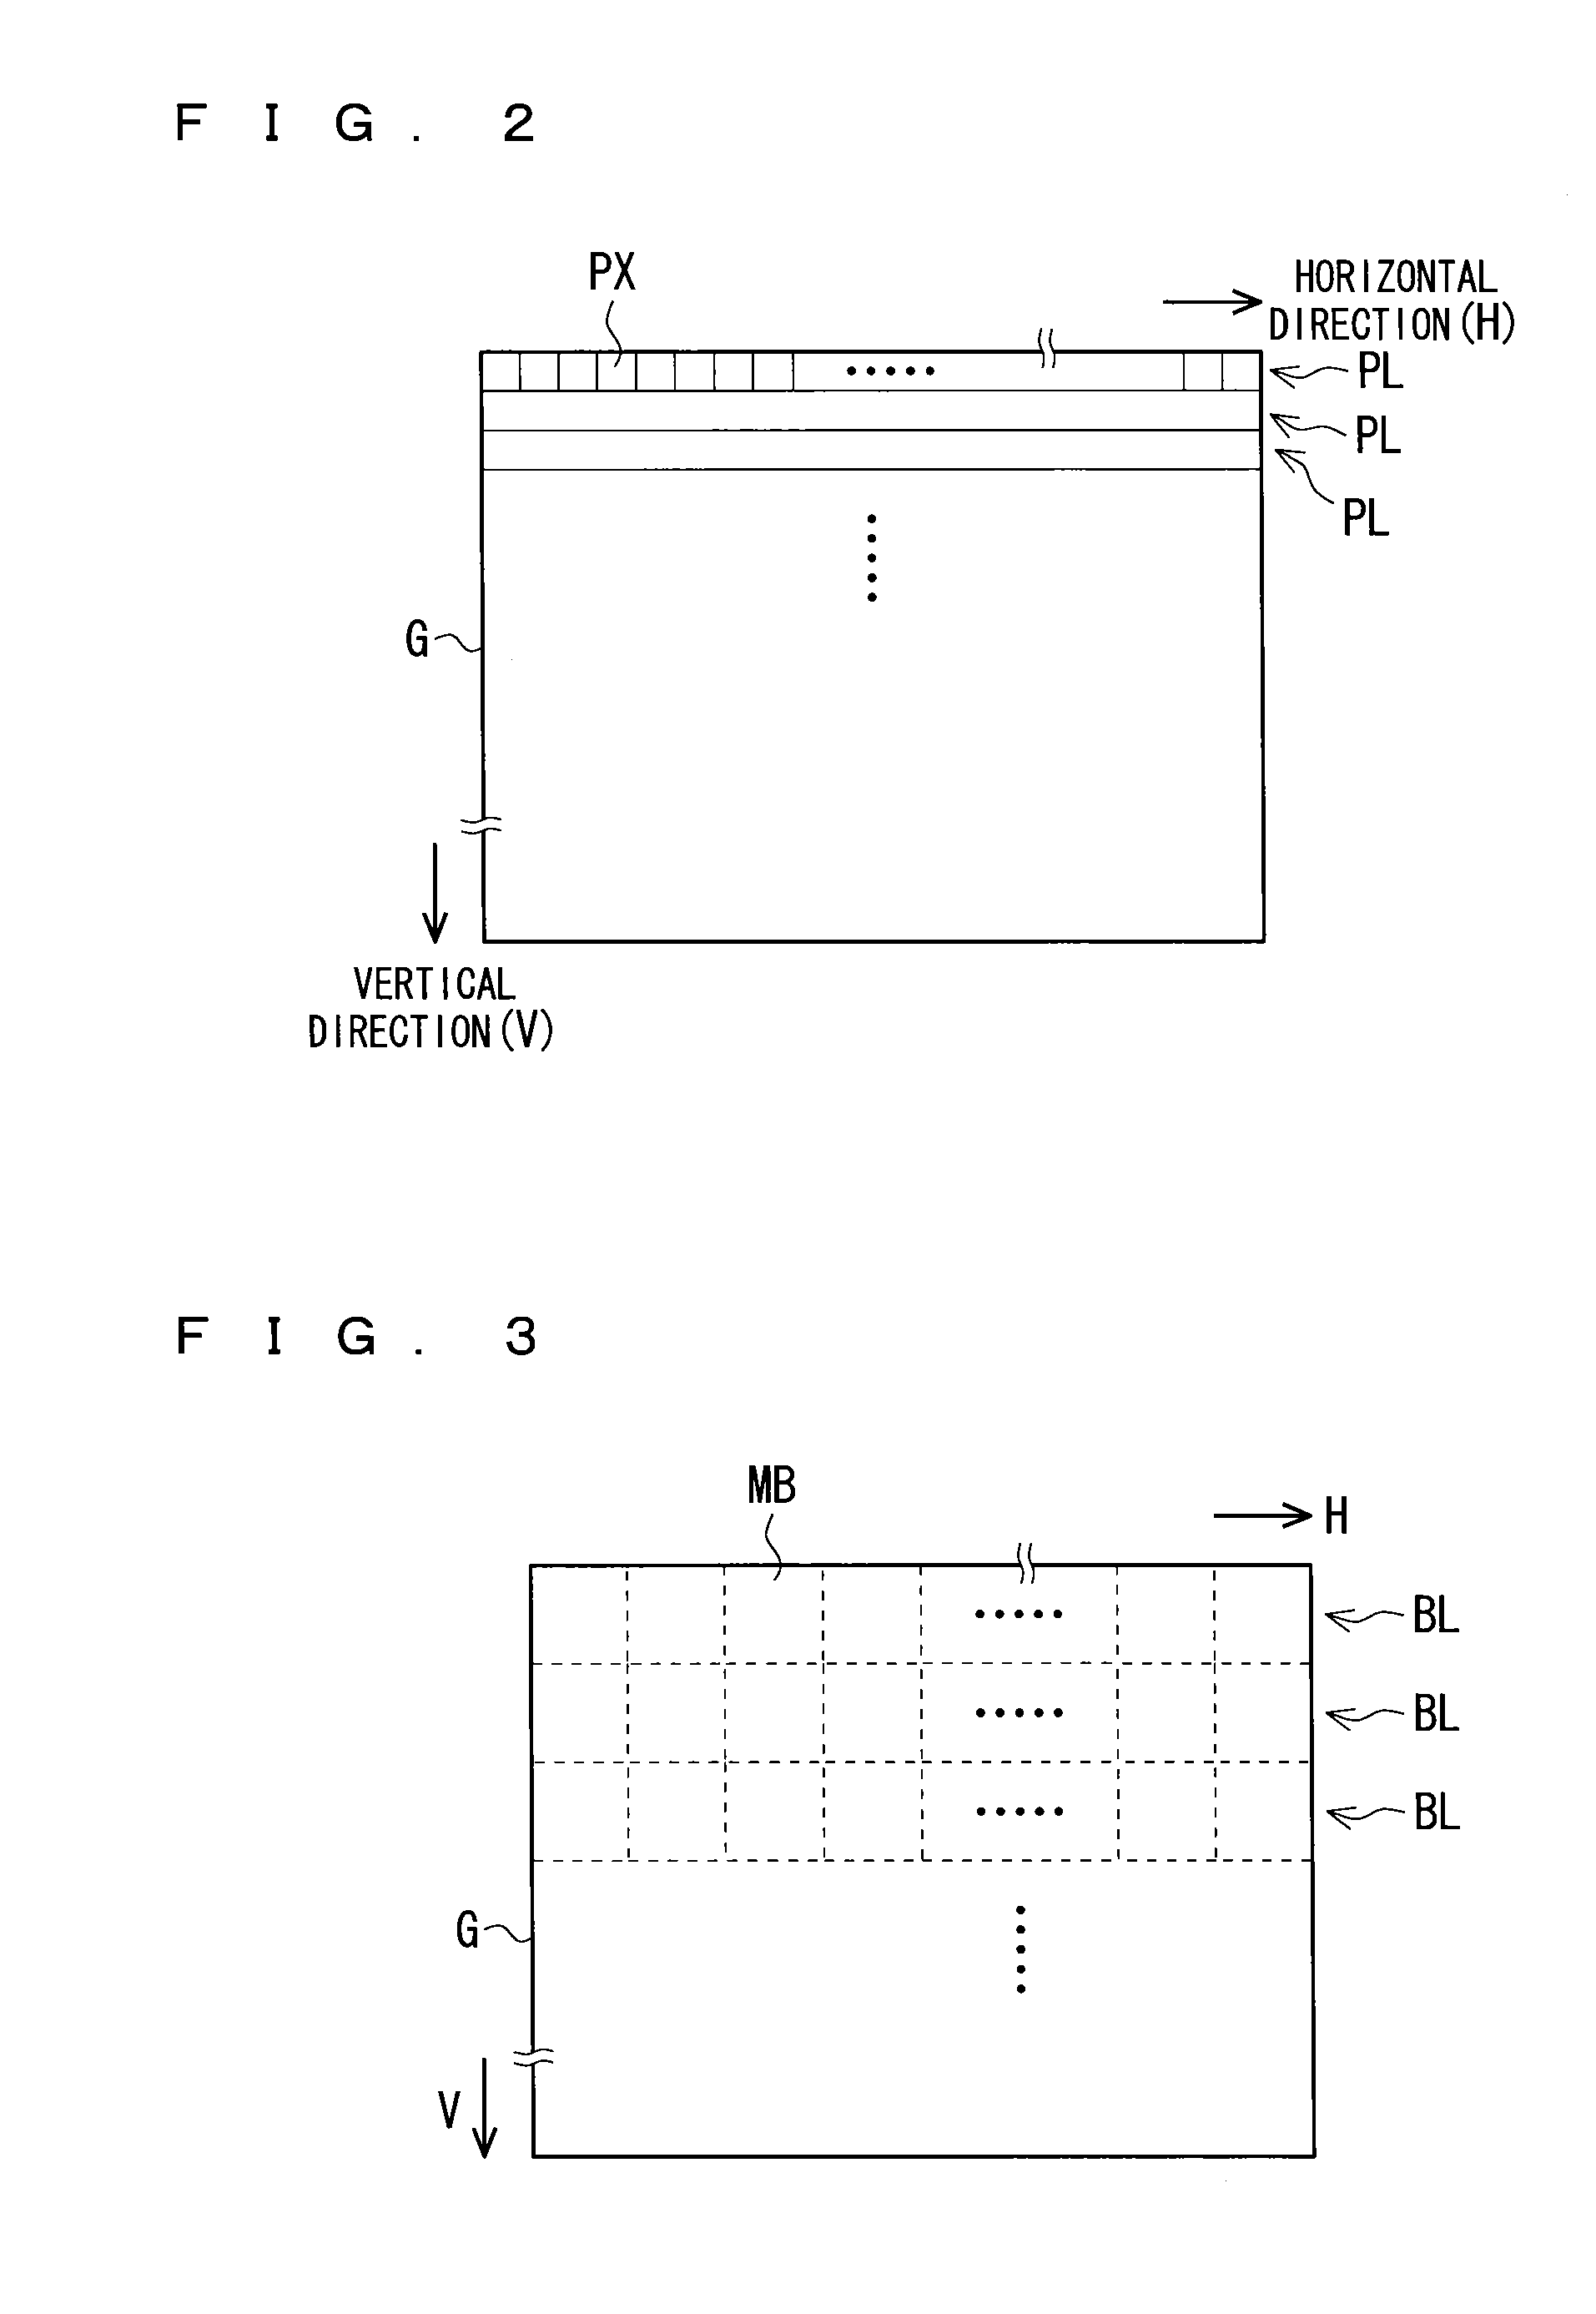 Image processing apparatus and image processing interface circuit